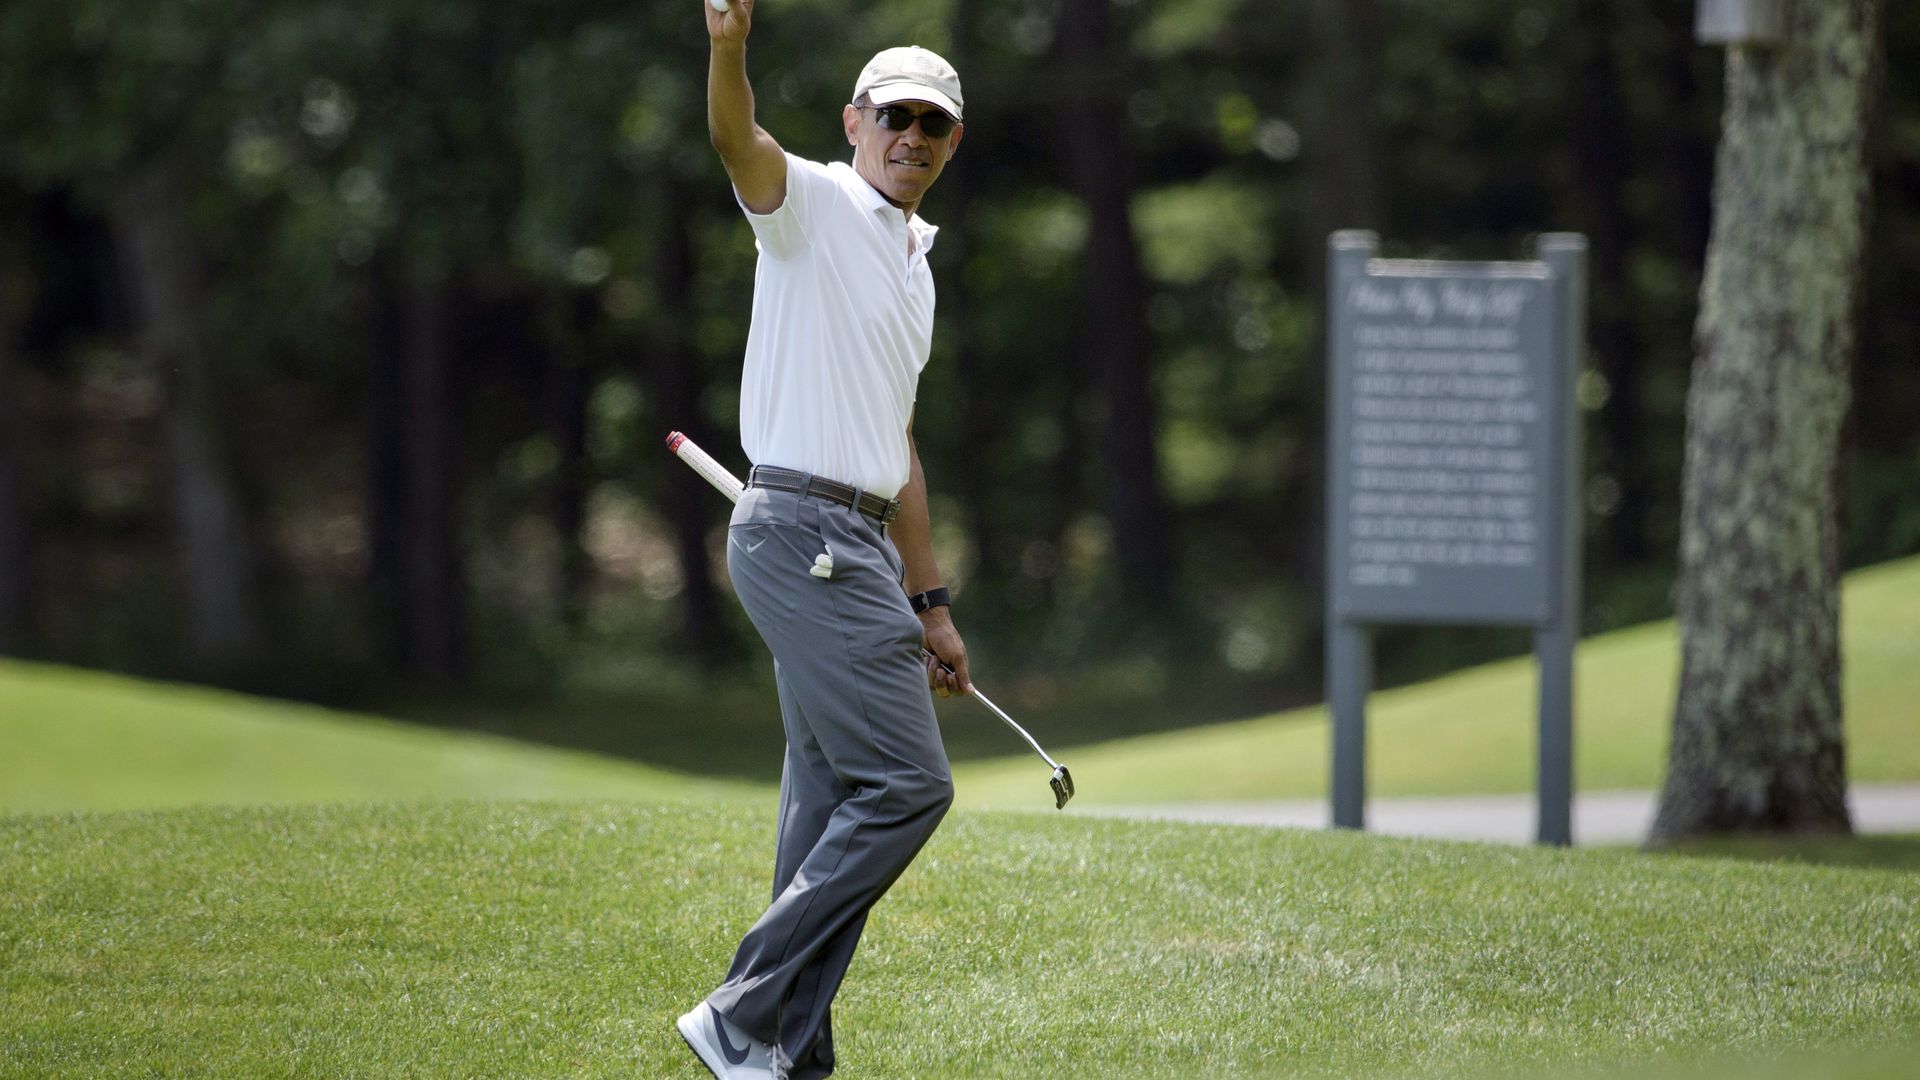 Former President Obama is seen waving while golfing on Martha's Vineyard in 2015.